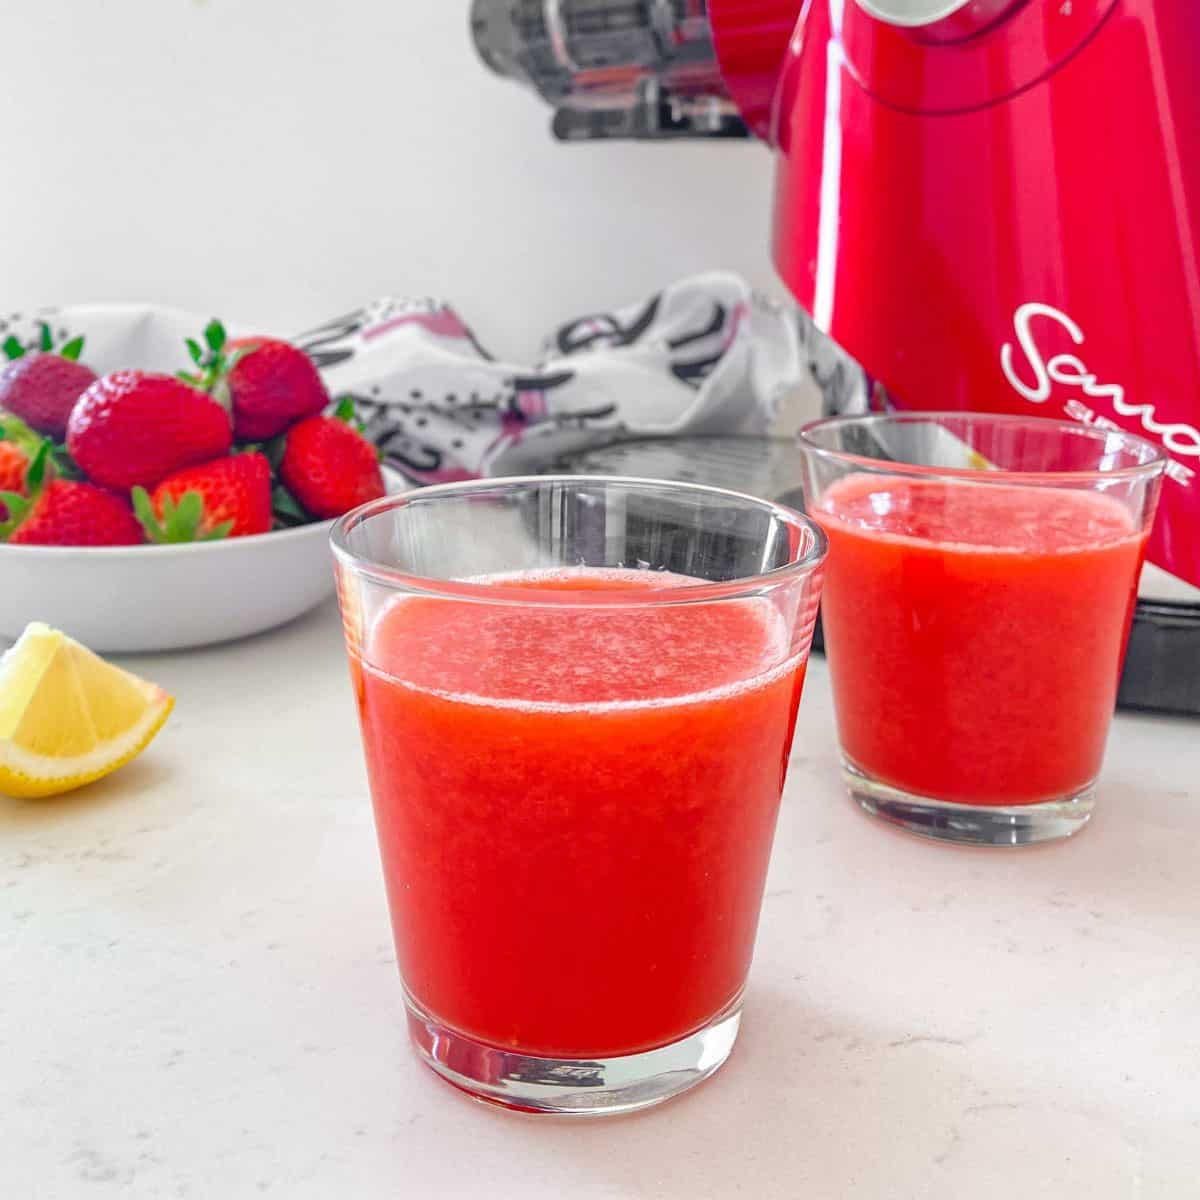 Two glasses of strawberry juice with juicer behind them.